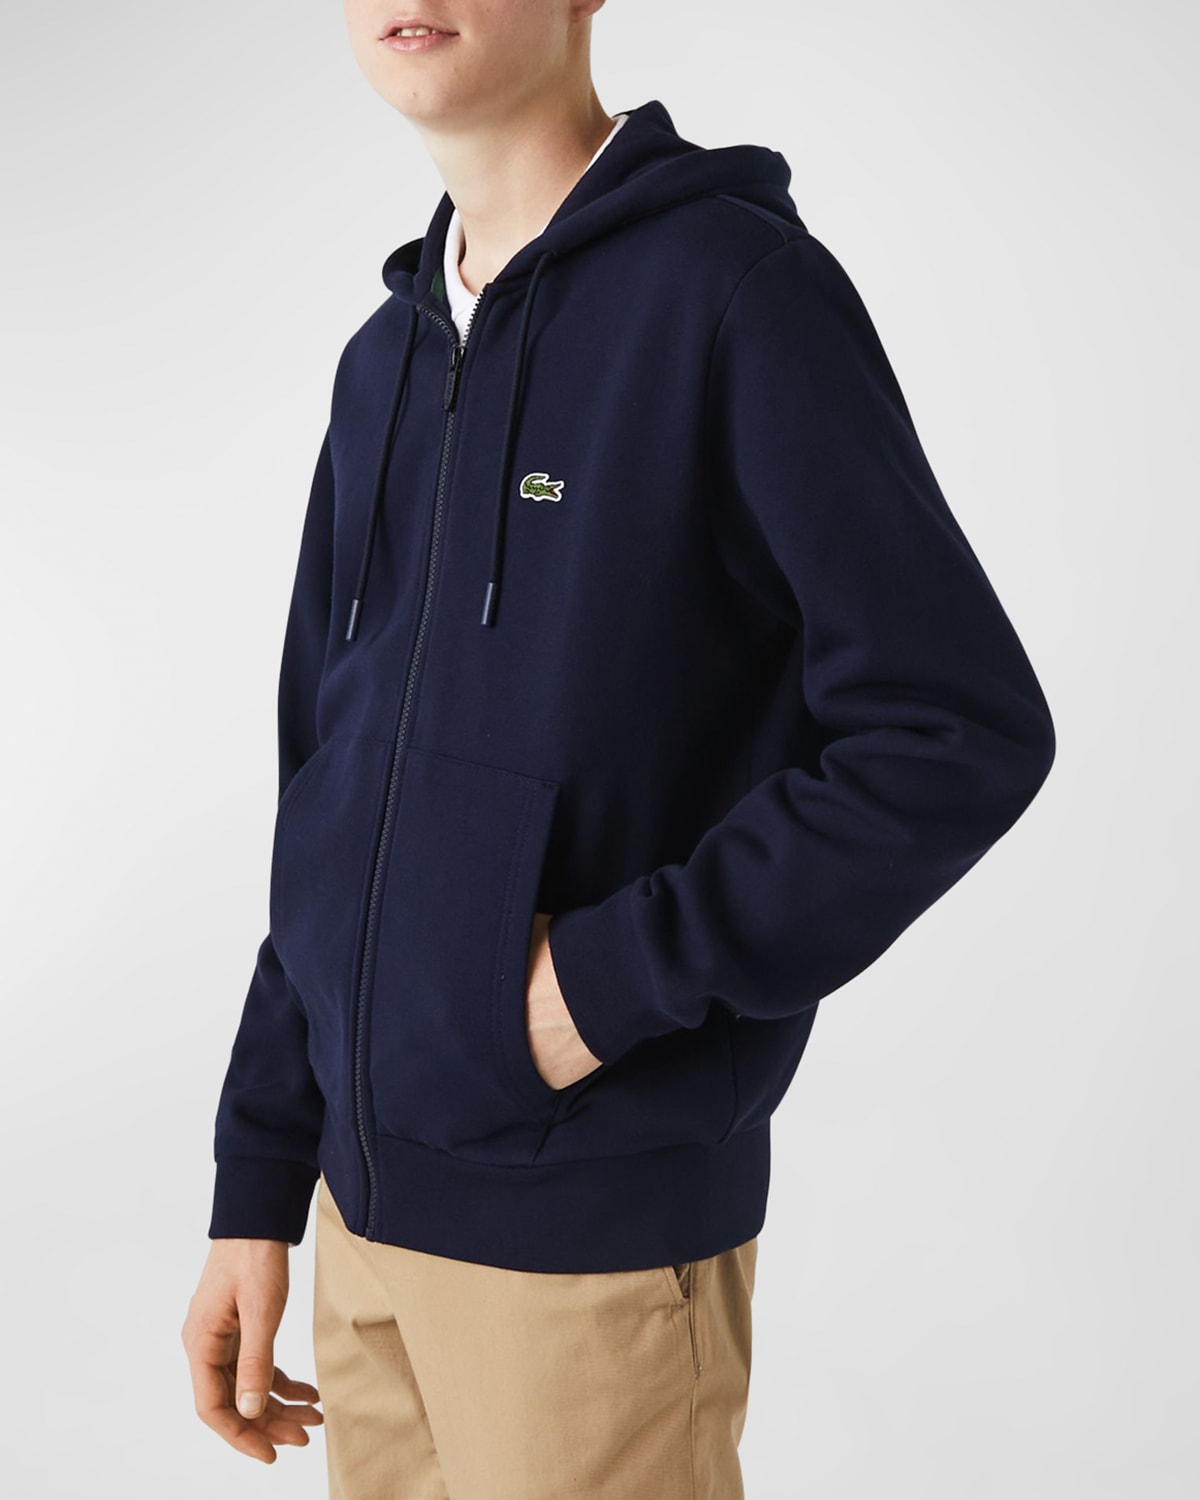 Lacoste Unisex Loose Fit Hooded Organic Cotton Sweatshirt - S In 166 Navy Blue